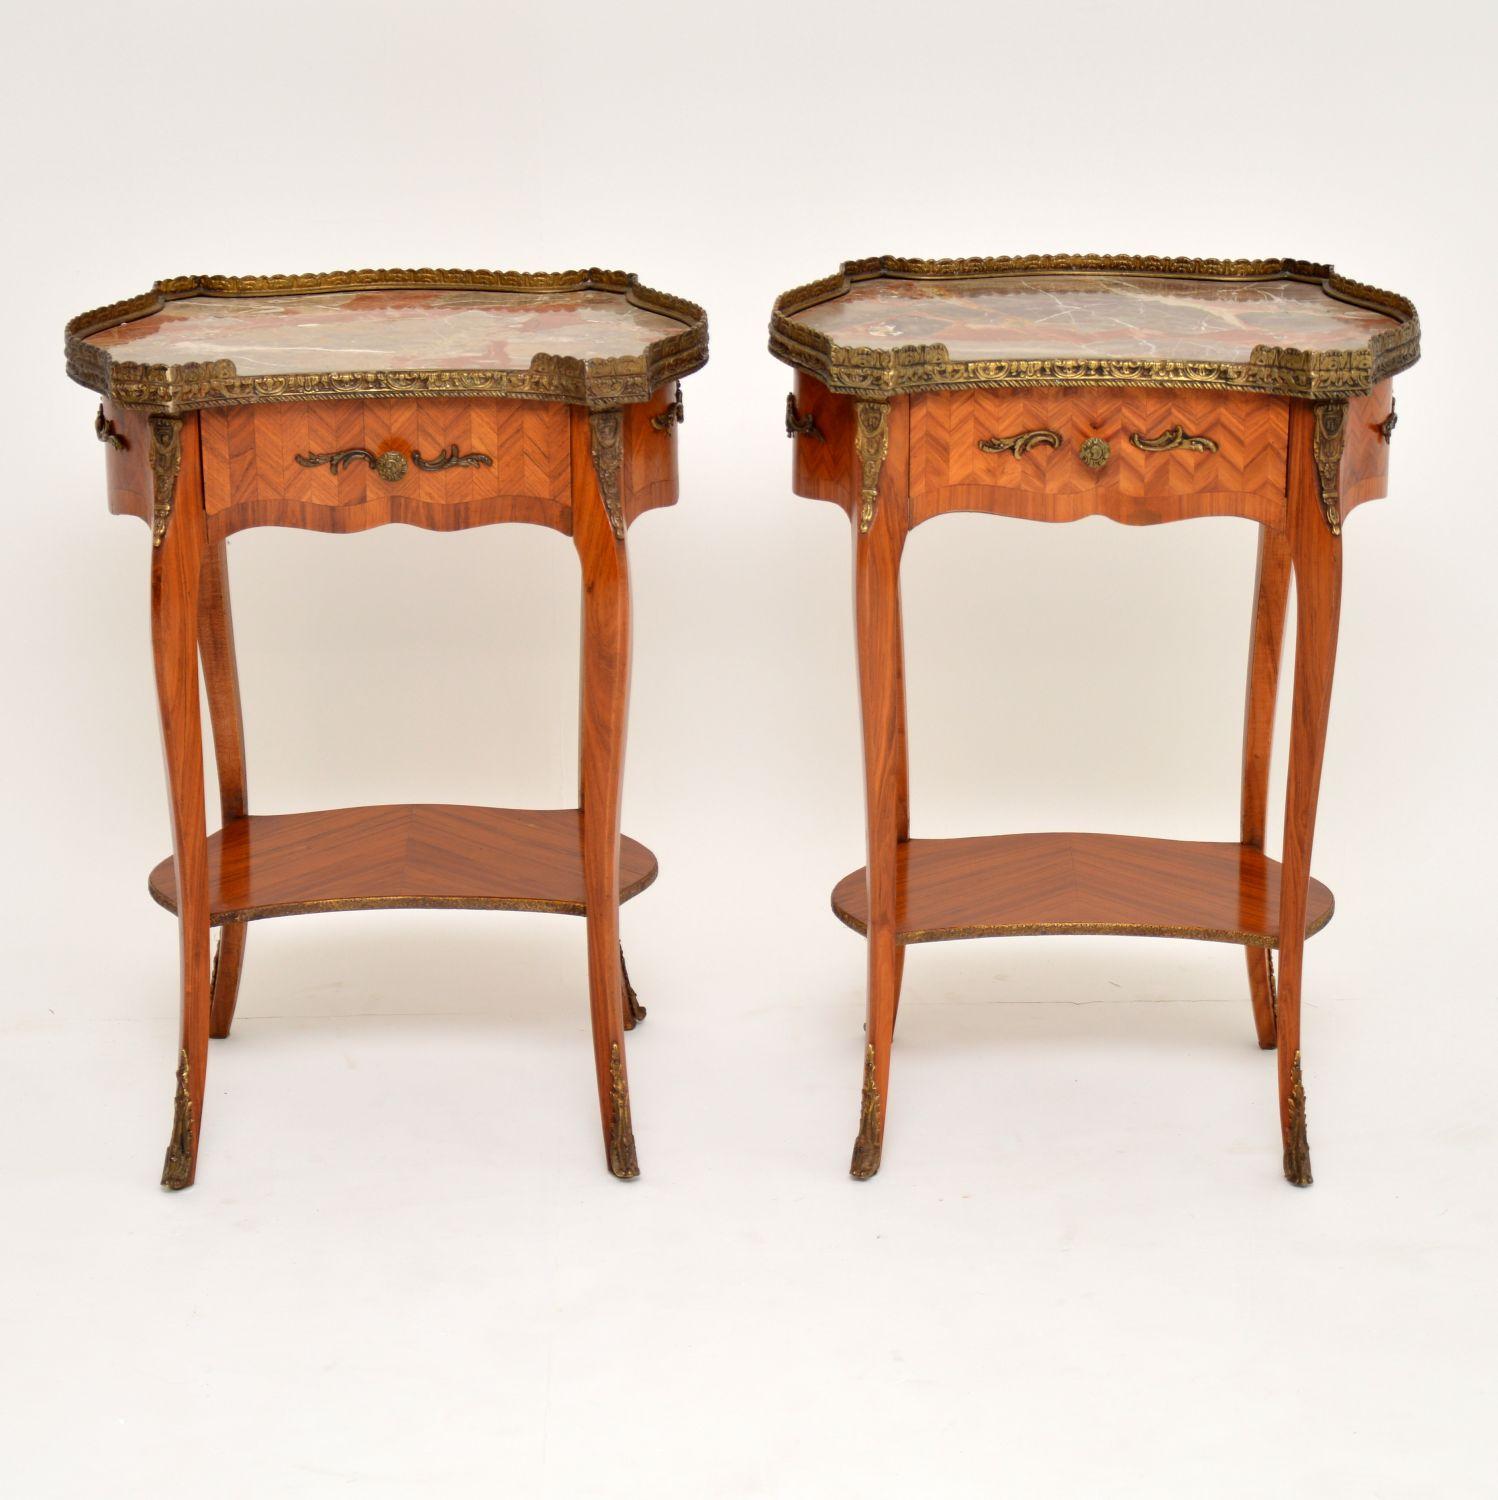 Pair of antique French style kingwood two-tiered side tables with colorful marble tops. These tables could have many uses in the home, like bedside tables, lamp tables, or end tables. I would date them to circa 1930s-1950s period & they have just